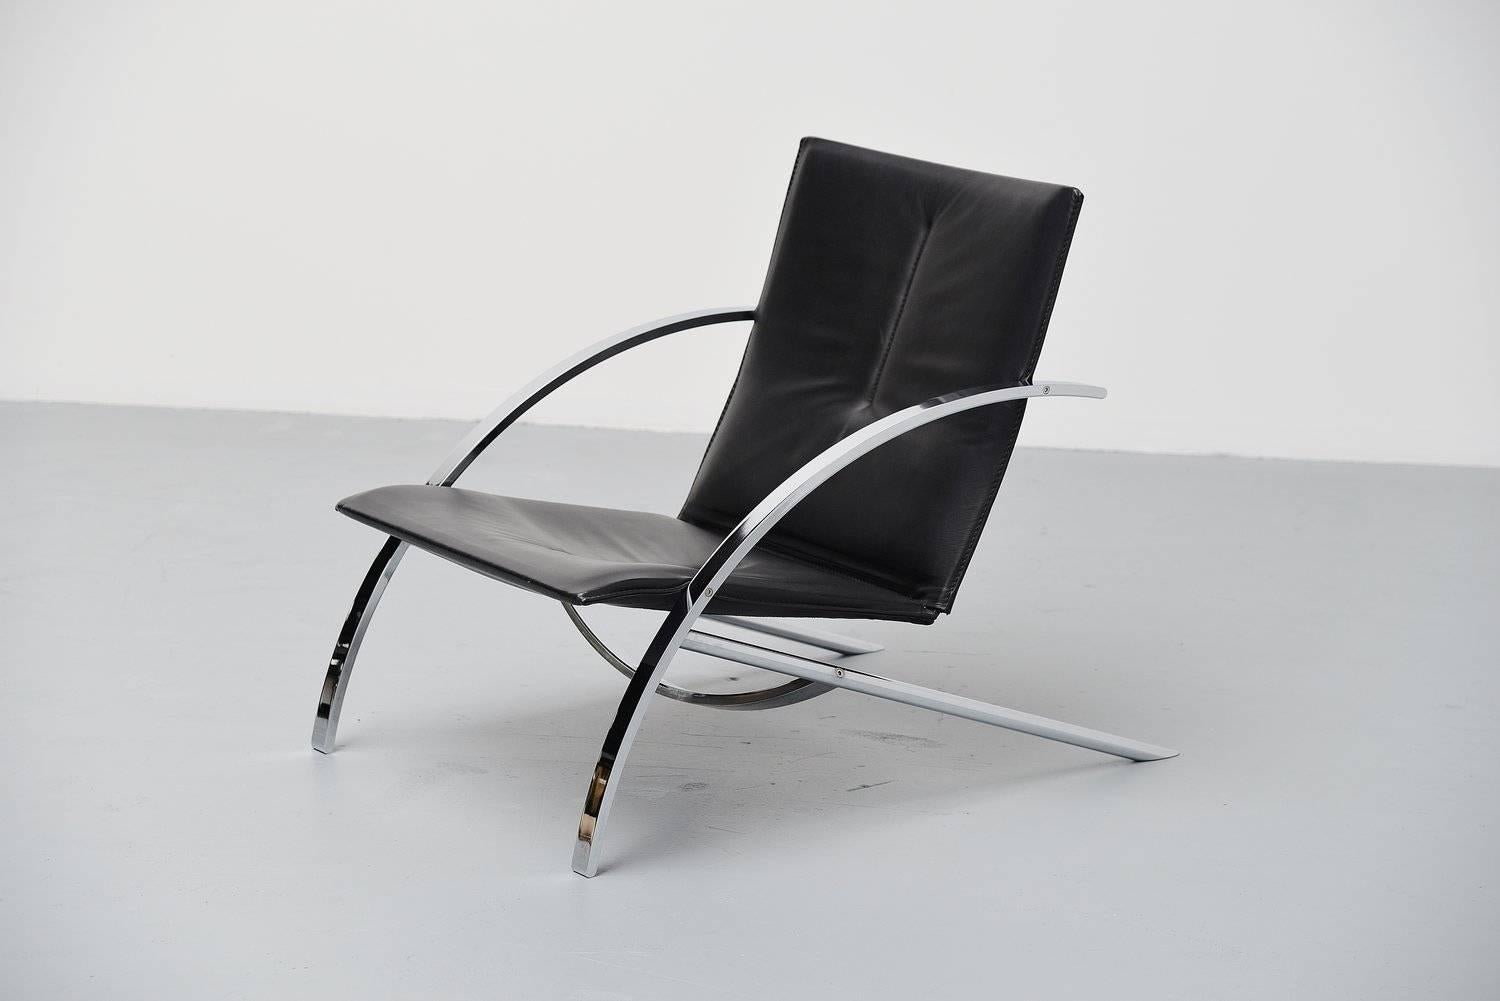 Fantastic lounge chair model Arco designed by Paul Tuttle for Strässle International, Switzerland 1976. Super heavy quality lounge chair in heavy solid chrome plated metal and high quality black leather upholstery. I don't think this chair was used